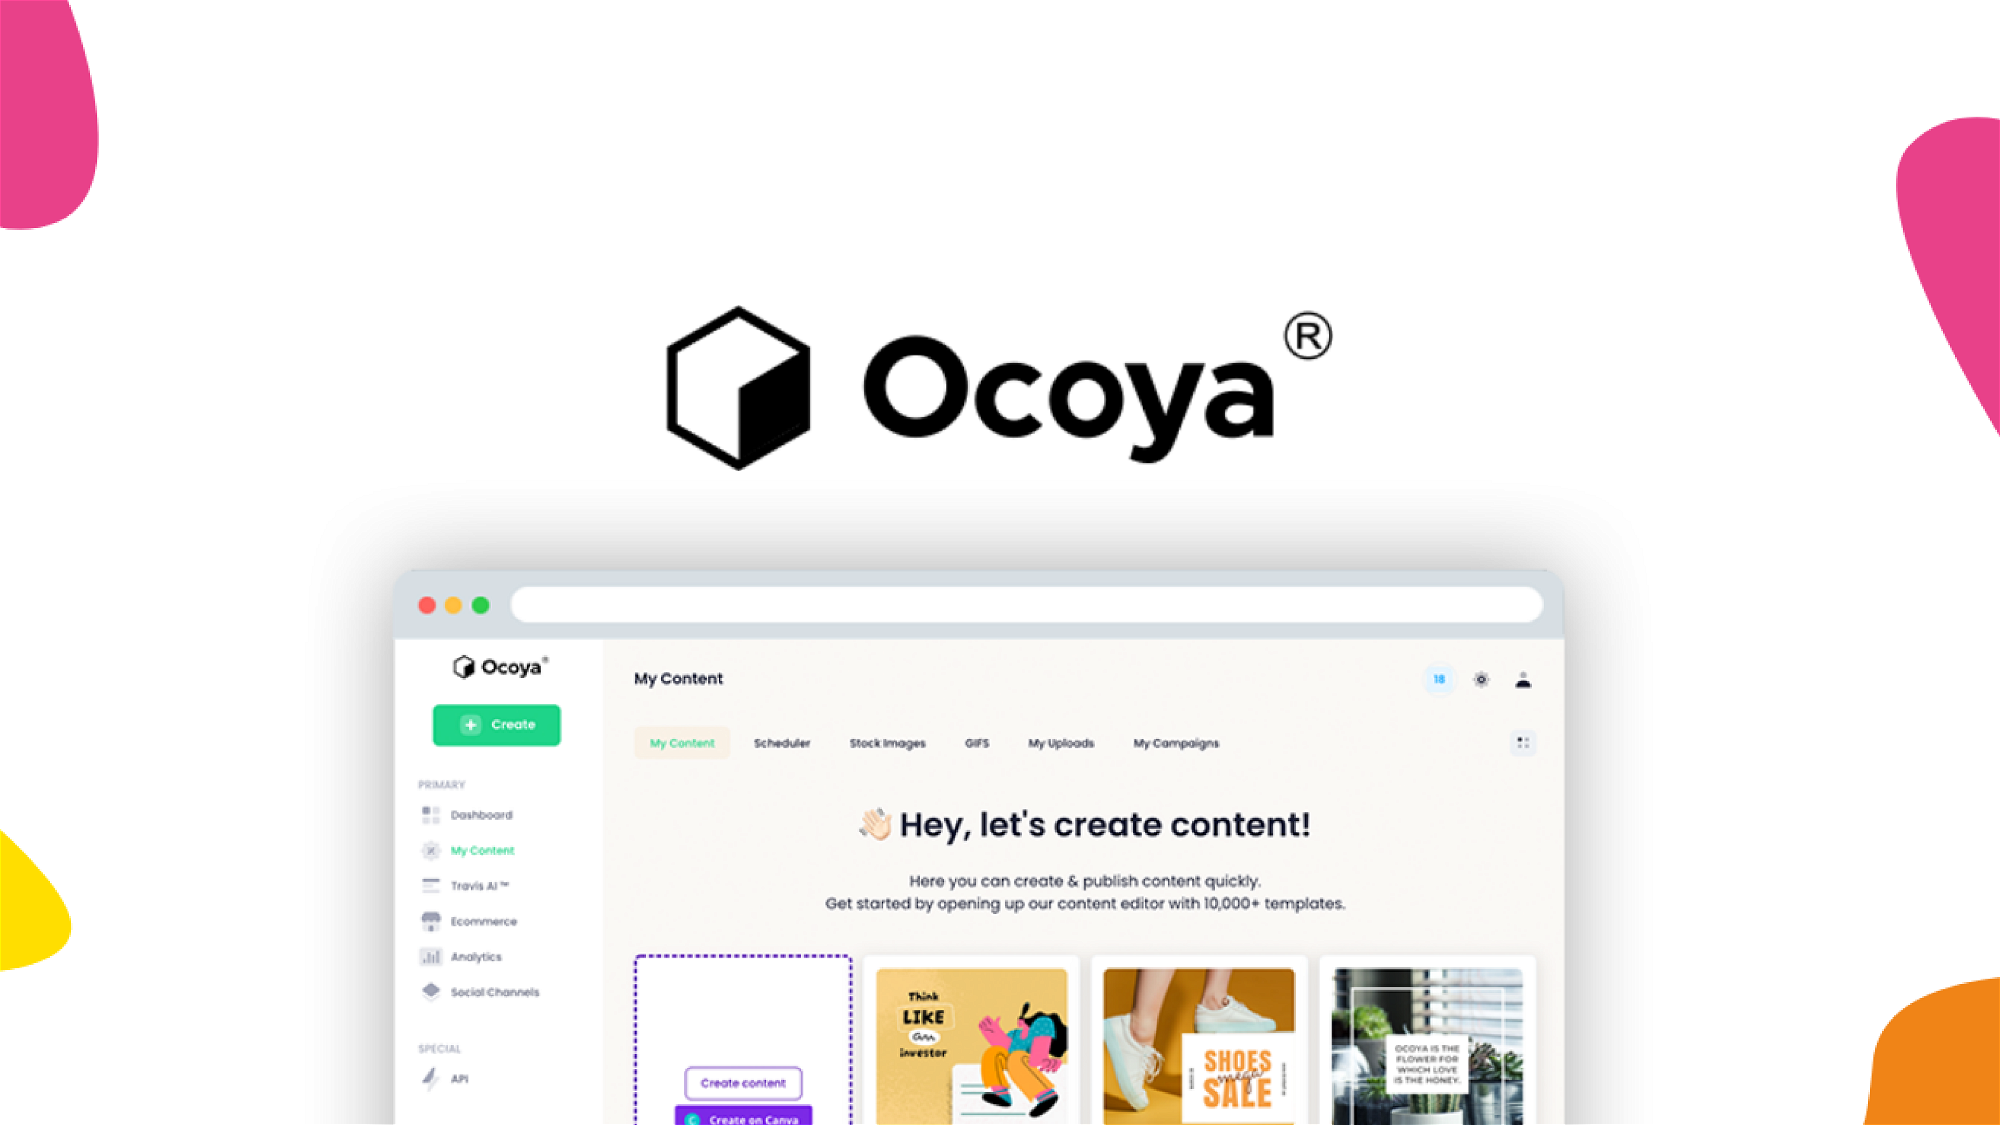 Ocoya - Run content marketing strategy with AI | AppSumo